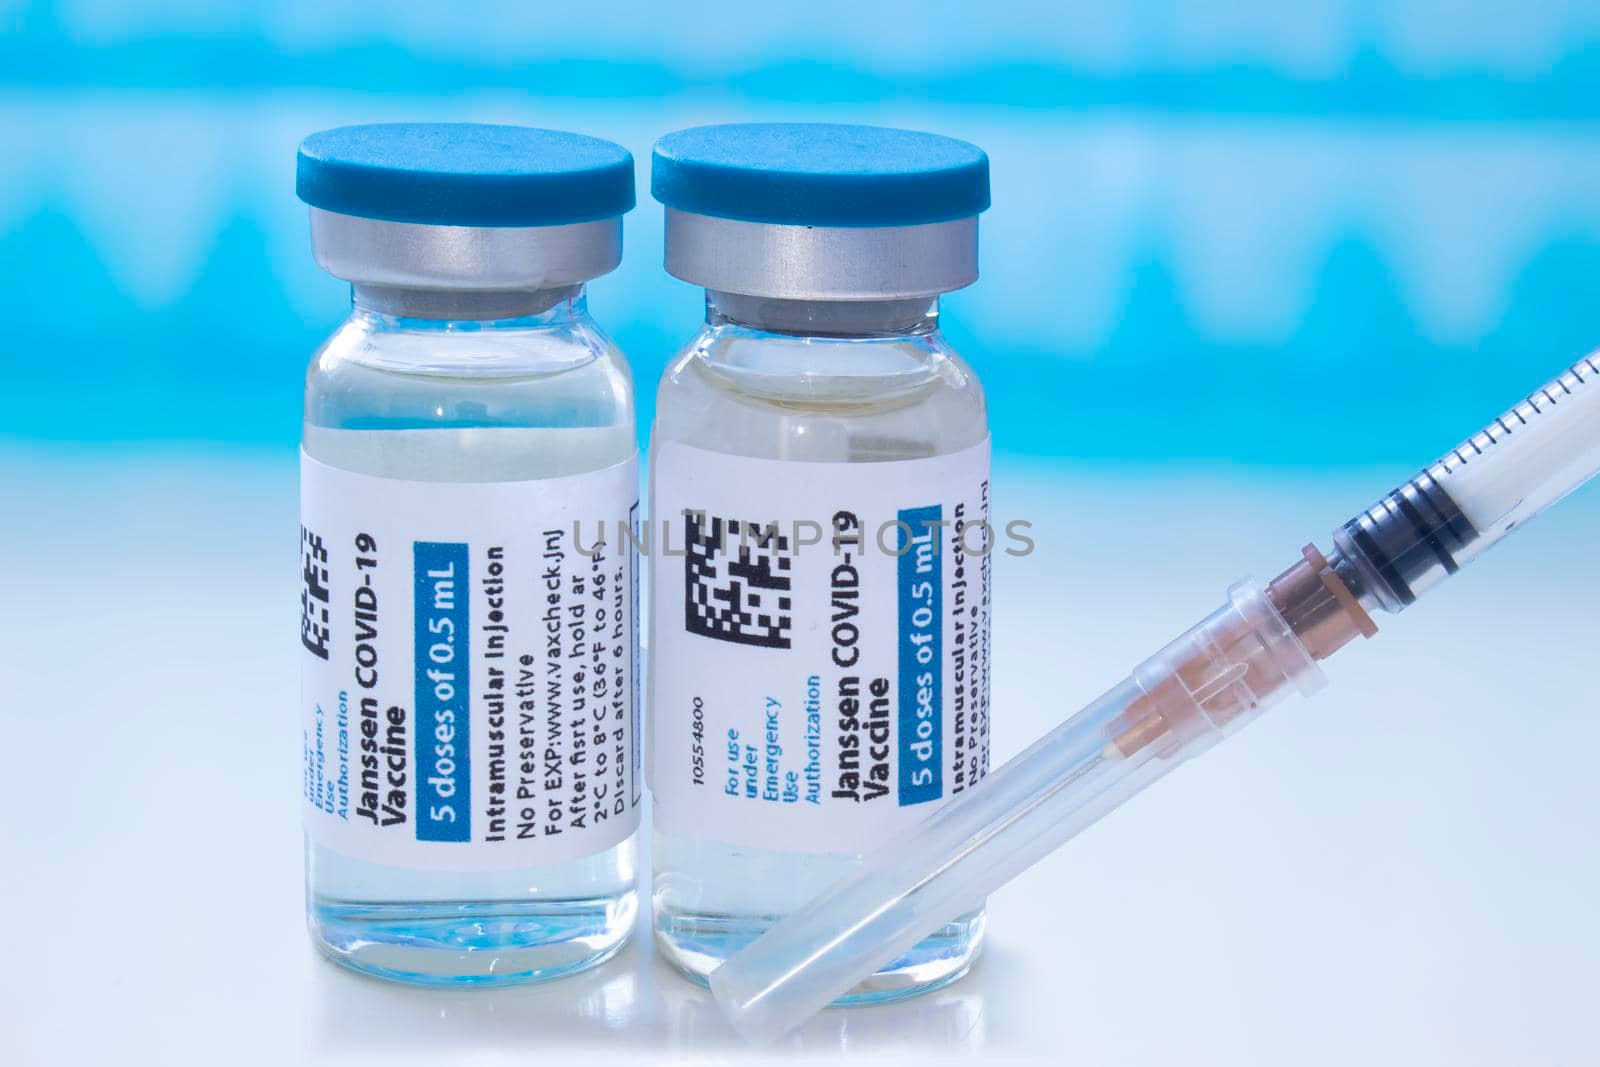 Calgary, Alberta, Canada. April 8, 2021. A couple of Janssen Johnson & Johnson dosis of Covid-19 vaccines on vial bottles and an injection syringe. by oasisamuel